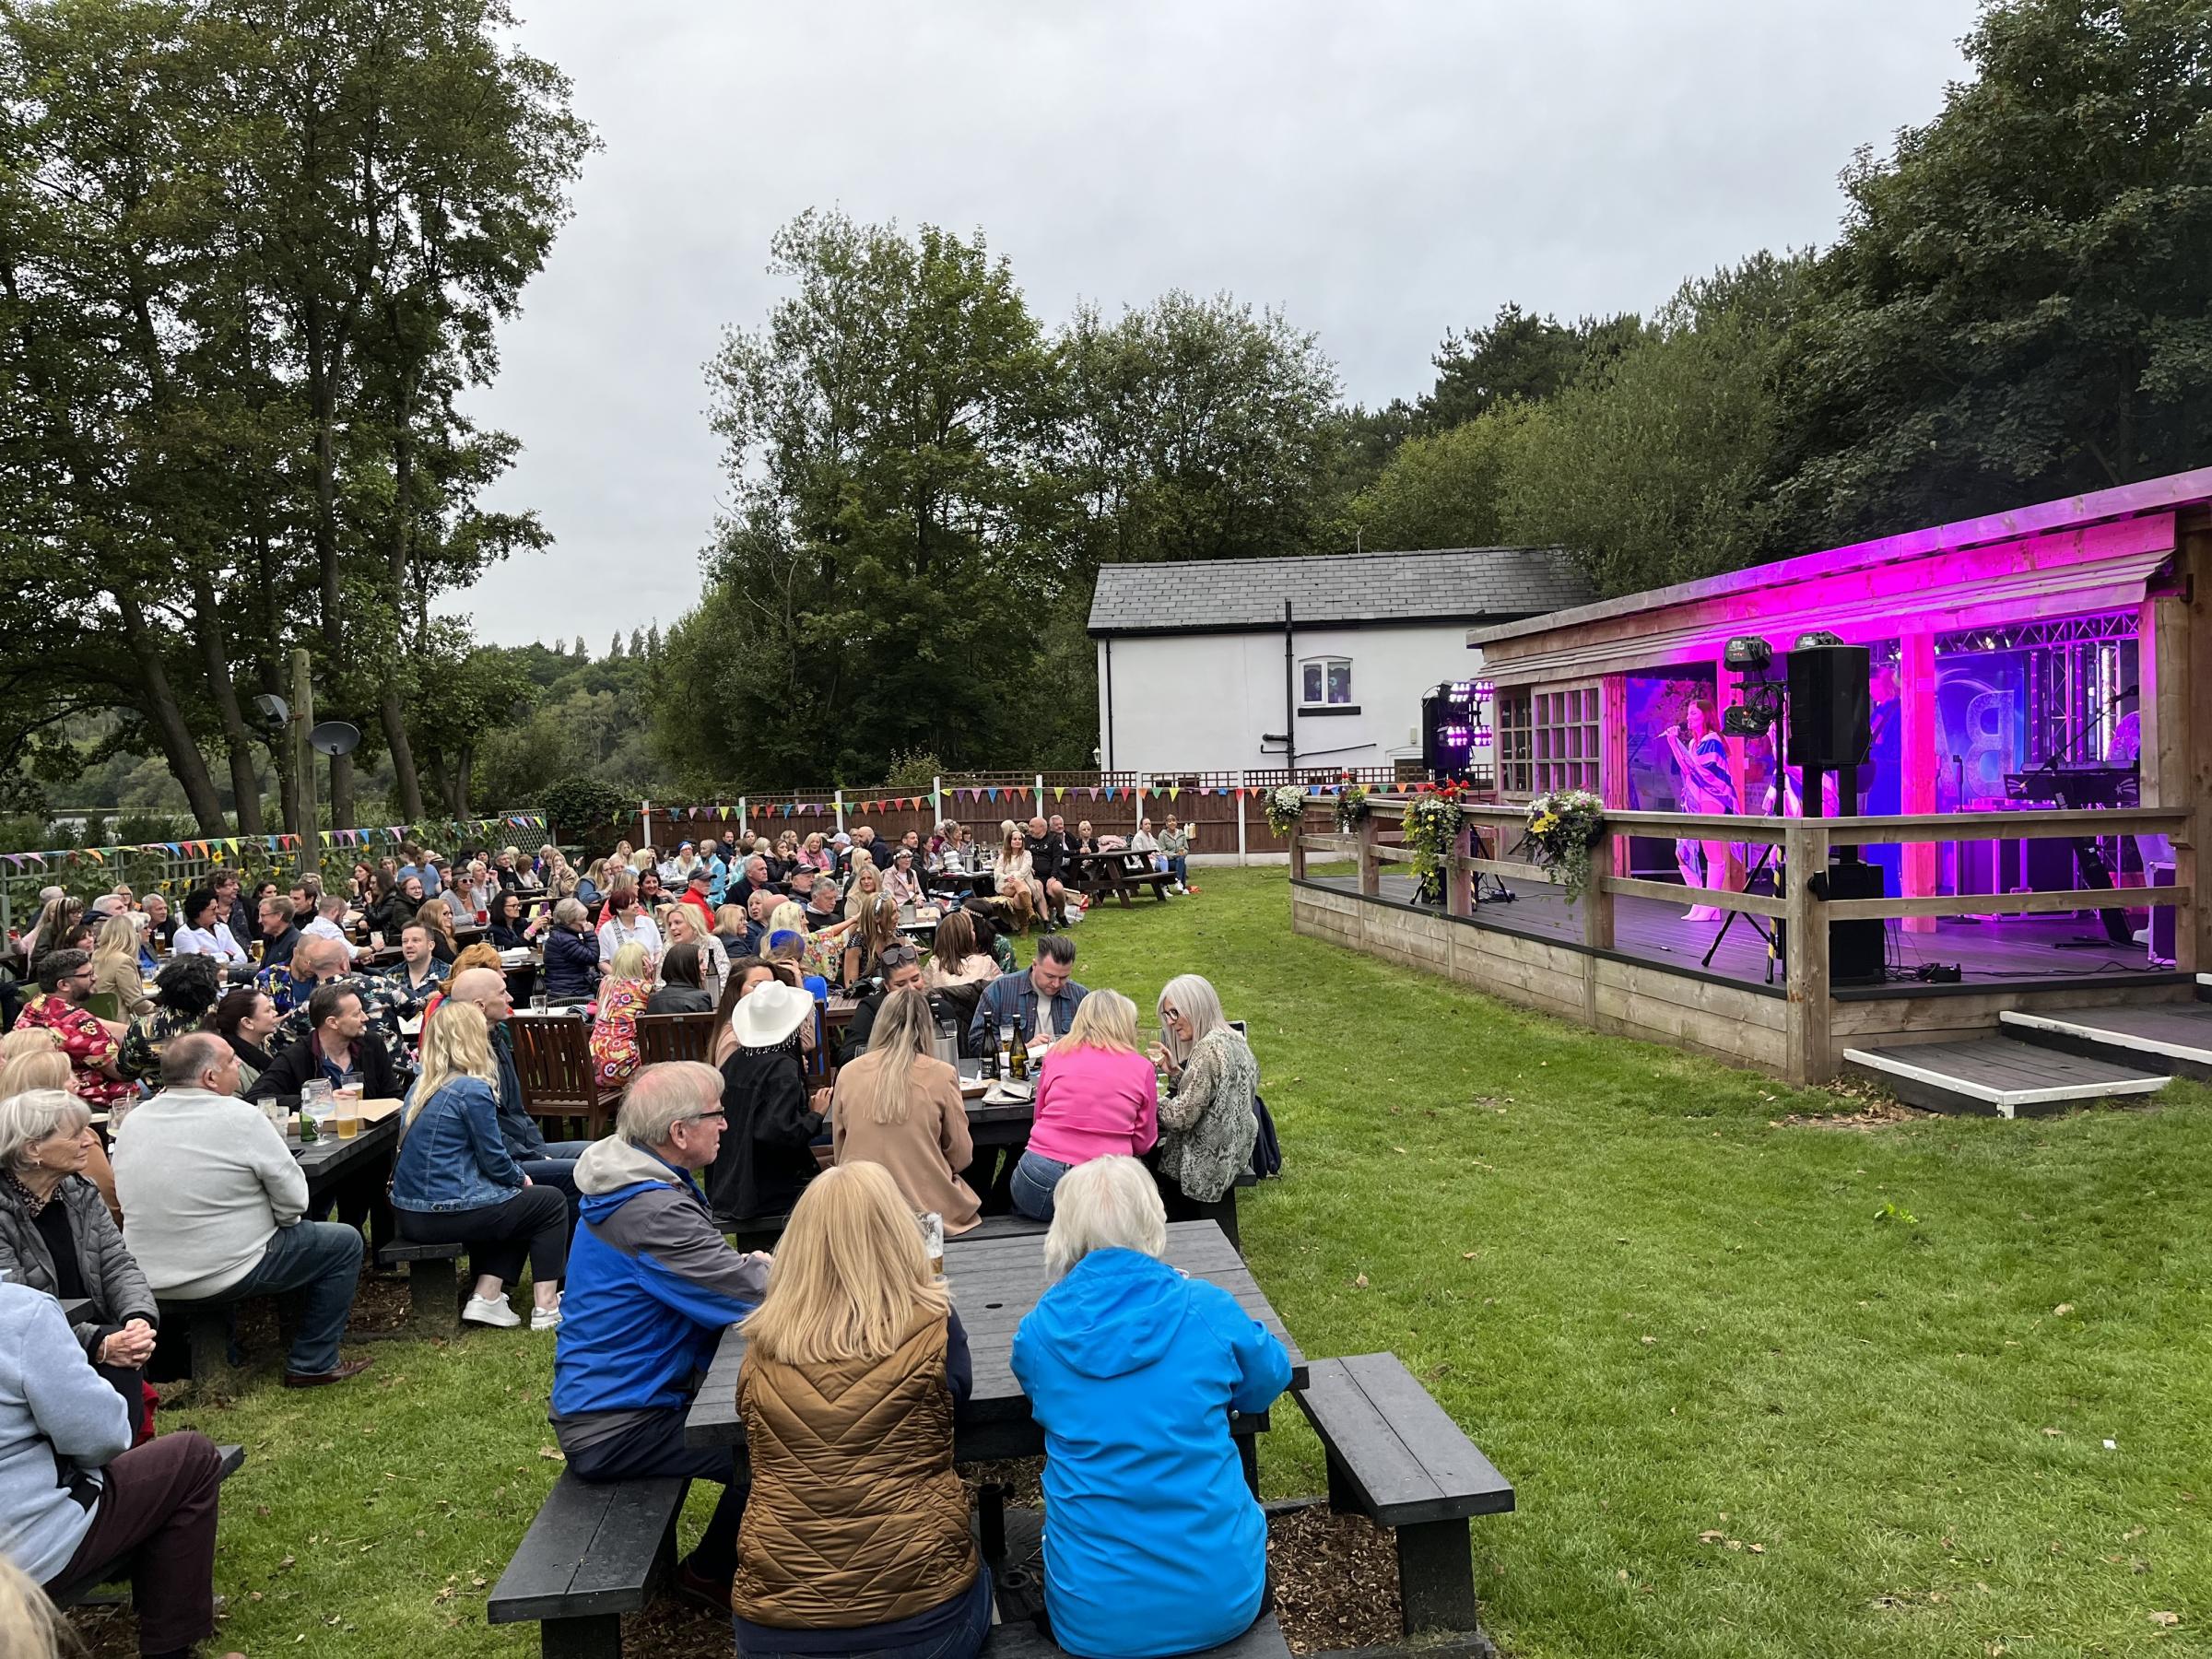 The first live music event took place in the beer garden earlier this month